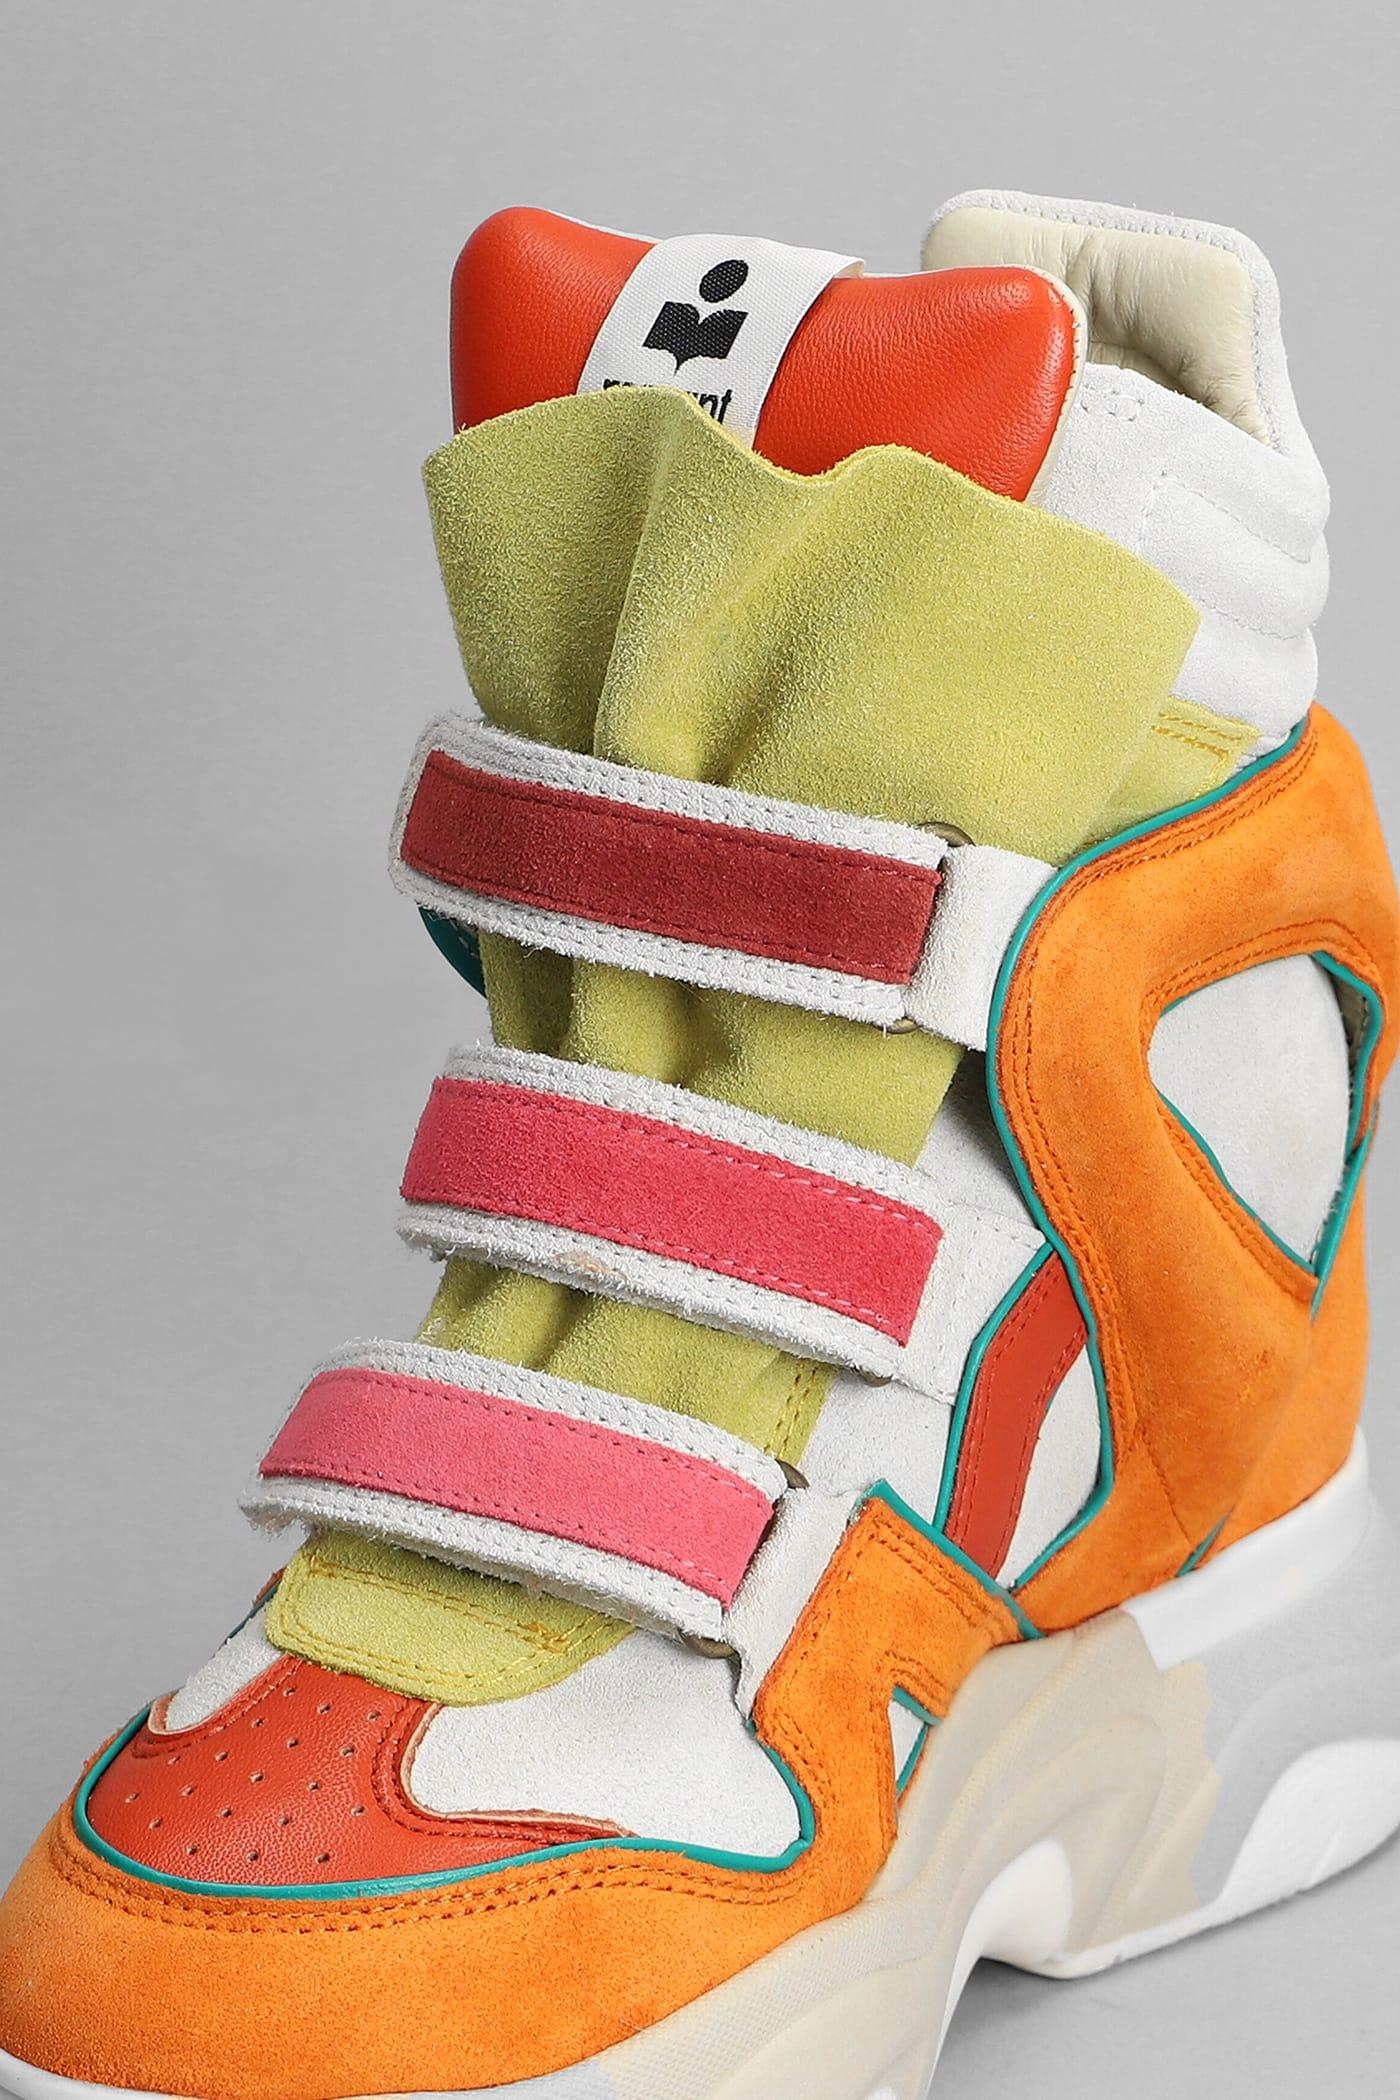 Isabel Marant Balskee Sneakers In Orange Suede And Leather | Lyst